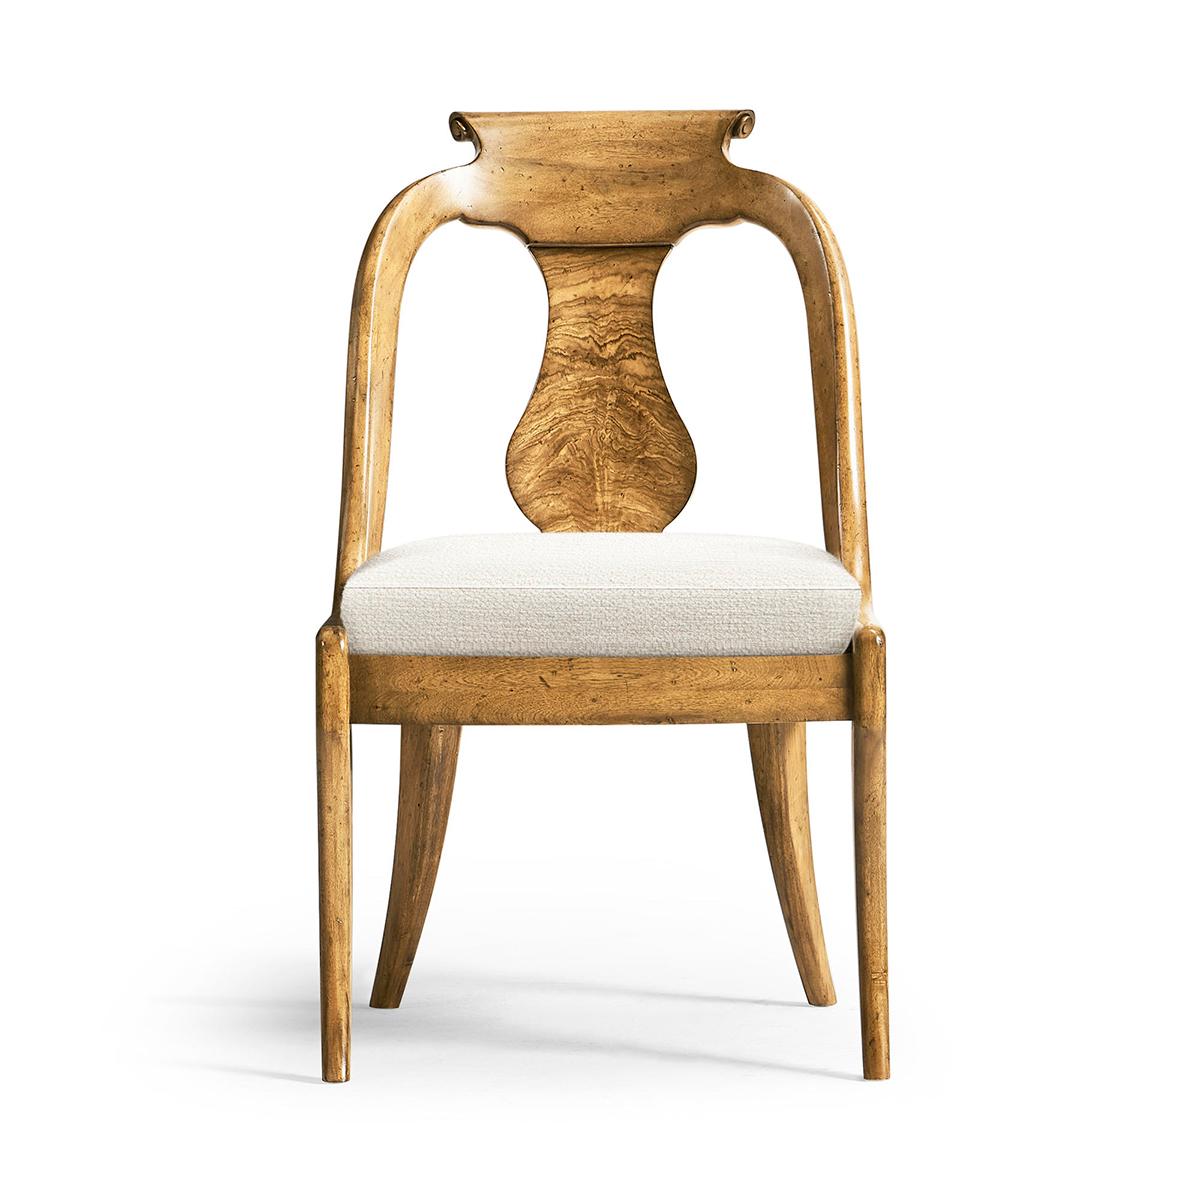 Featuring a gracefully curved urn form splat back adorned with exquisite figured Cerejeira veneers, known for their beautiful swirling patterns that captivate the eye. The veneers flow elegantly down the back, drawing attention to the chair's